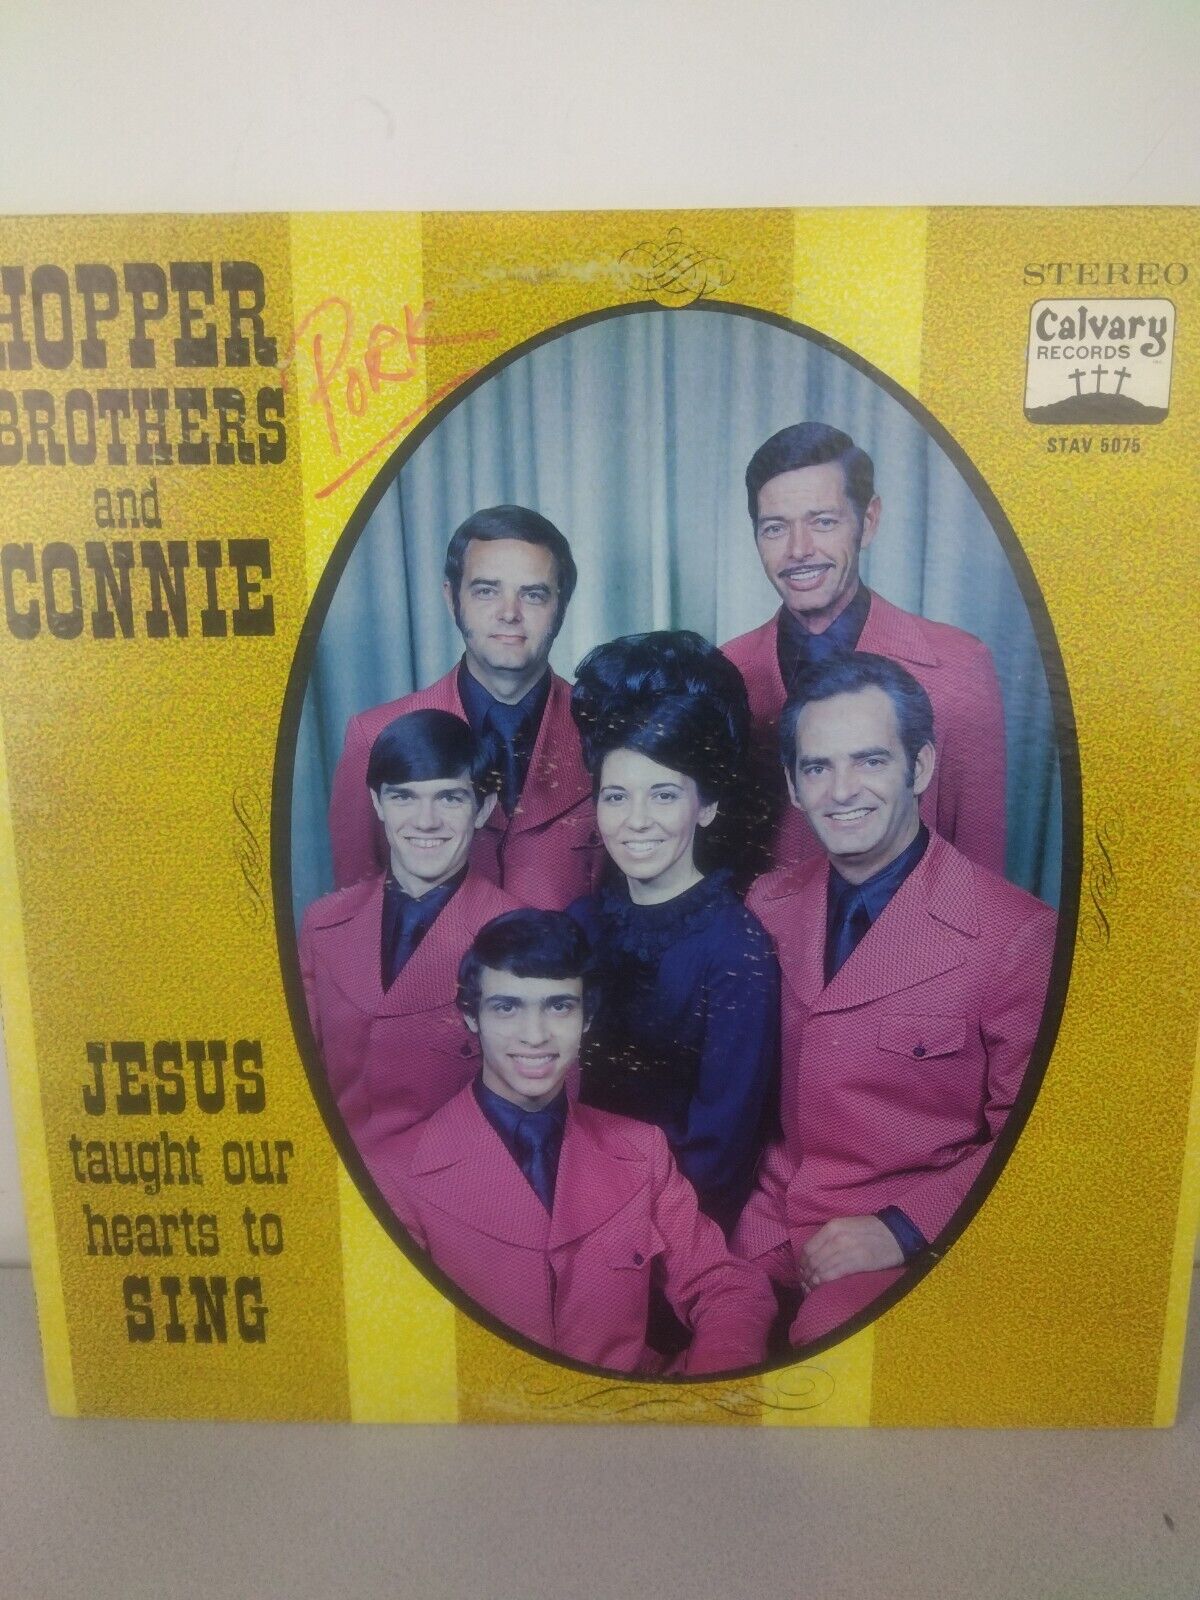 Hopper Brothers And Connie Jesus Taught Our Heart To Sing Gospel Record   (LR24)